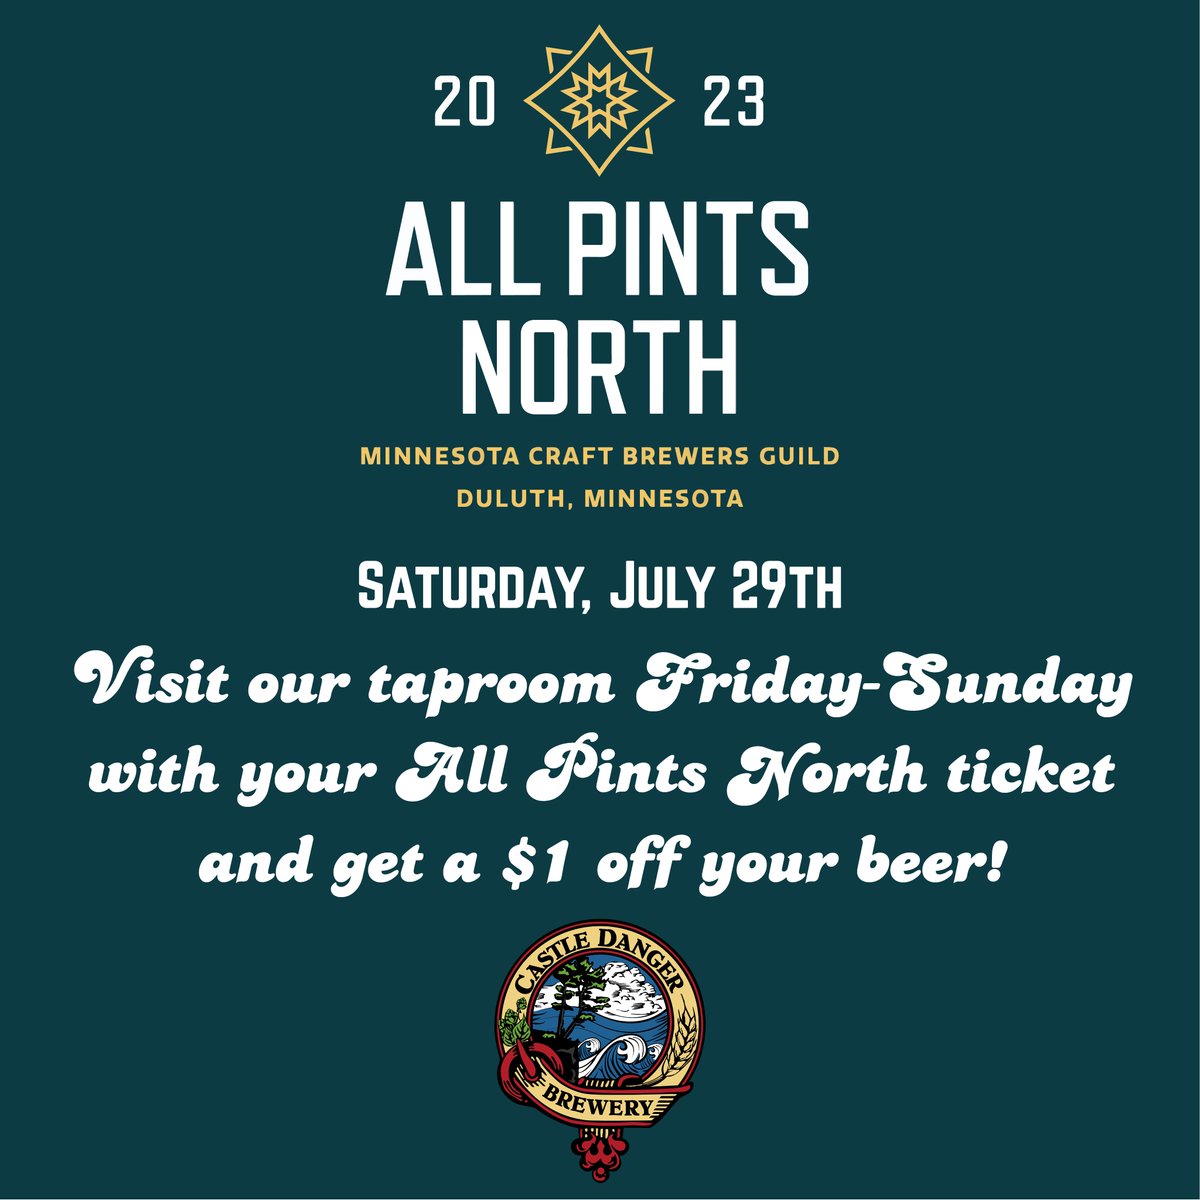 If you're in town for #AllPintsNorth this weekend, stop by our taproom for a pint! Escape the hustle and bustle of Duluth with a short trip up the Scenic HWY to our taproom in Two Harbors. Show us a copy of your All Pints North ticket and we'll give you $1 off your first beer!🍻